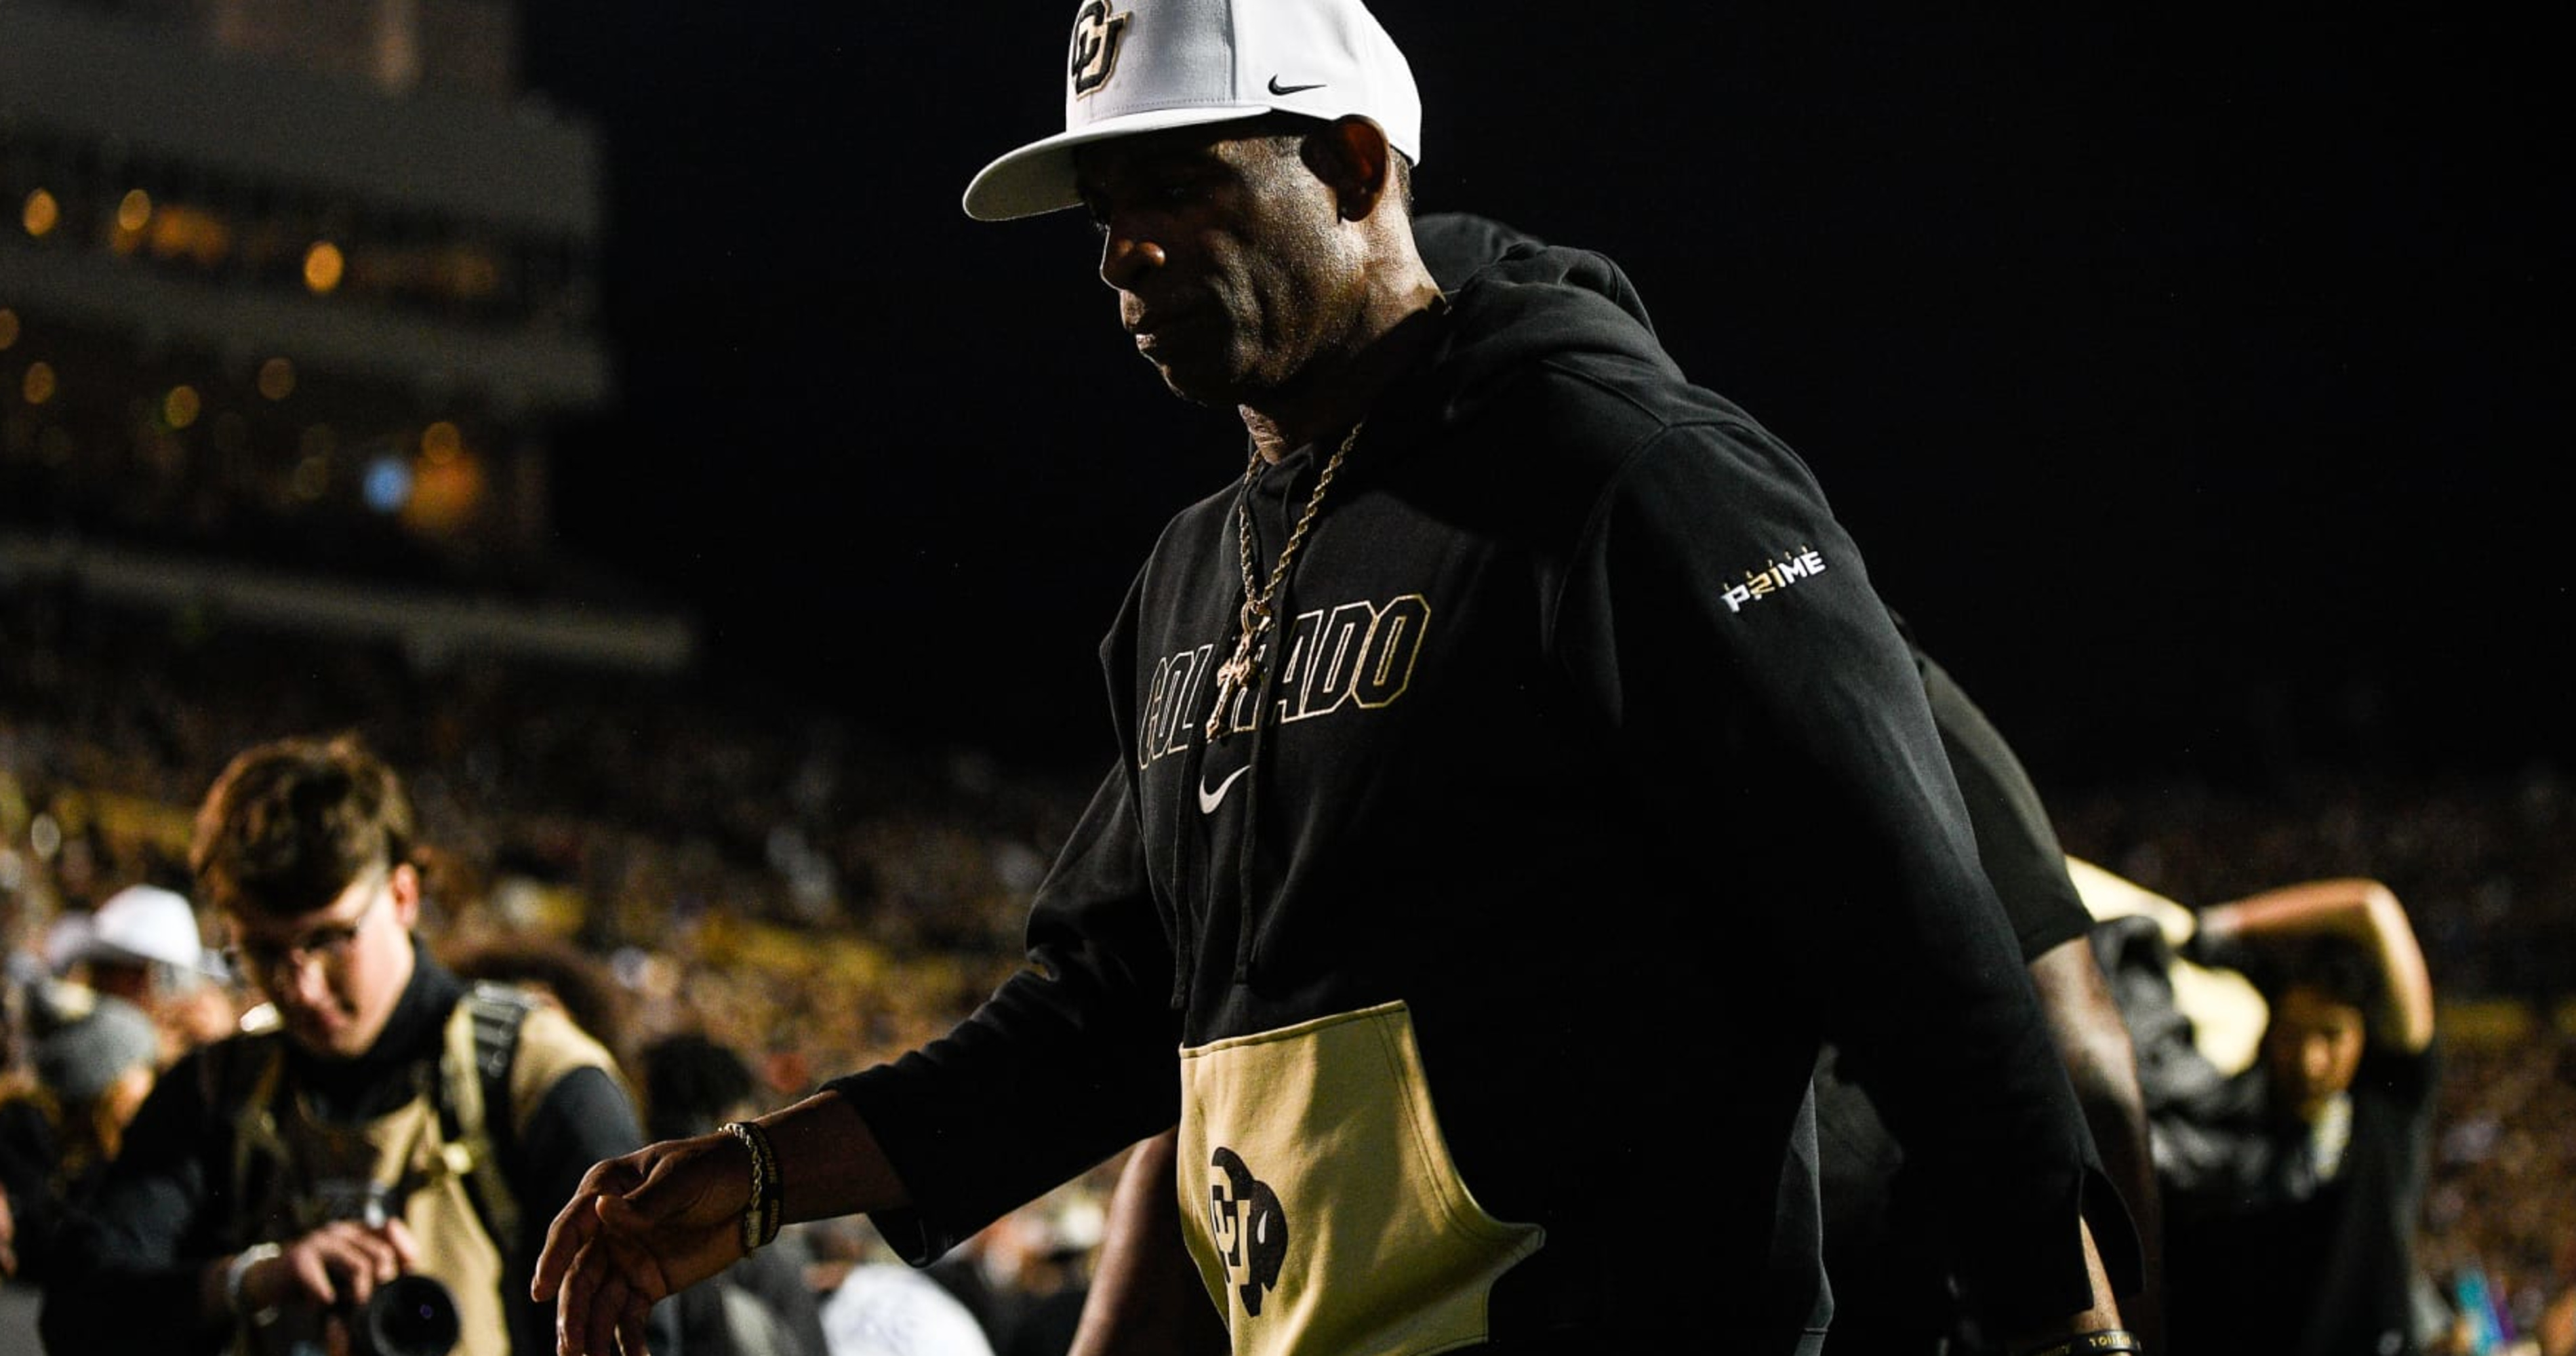 Deion Sanders to Colorado Players: Can't Let CSU Win, Jay Norvell Would Be Unbearable